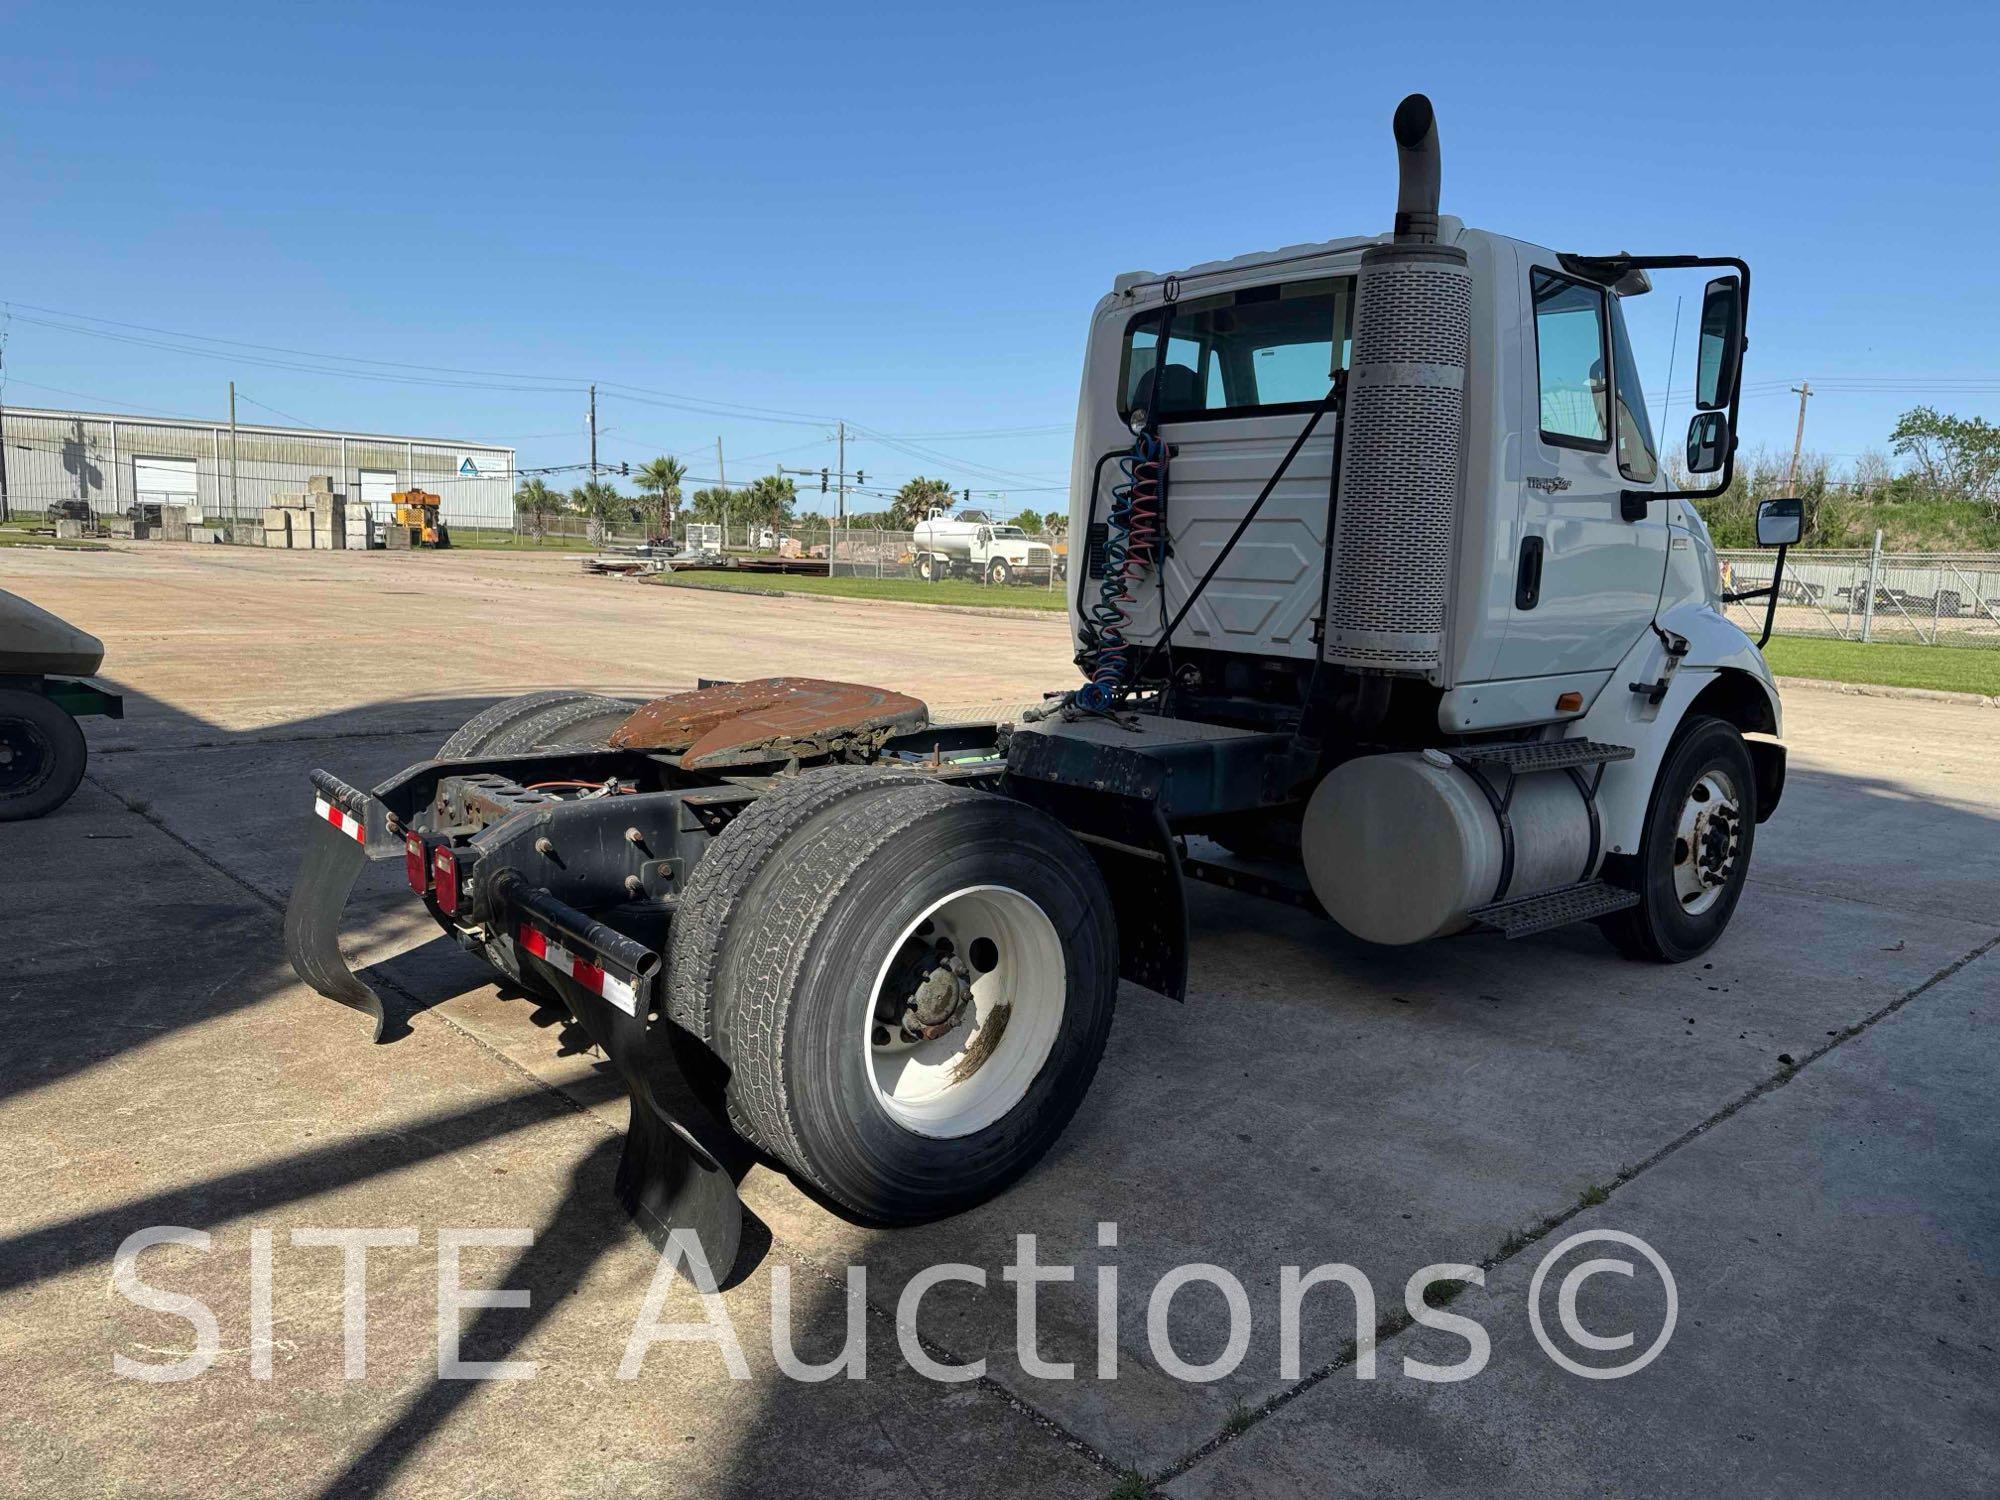 2013 International 8600 S/A Daycab Truck Tractor